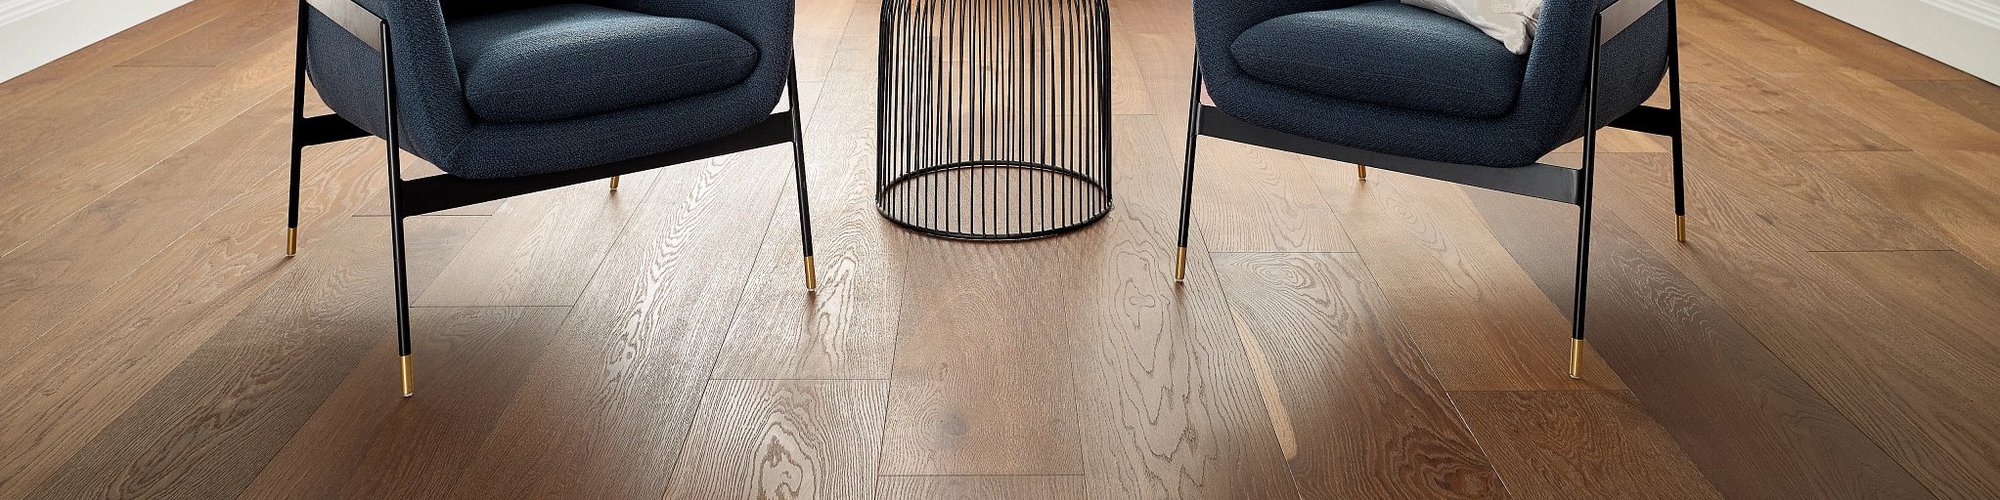 two chairs on hardwood floor - Promotions in Auburn